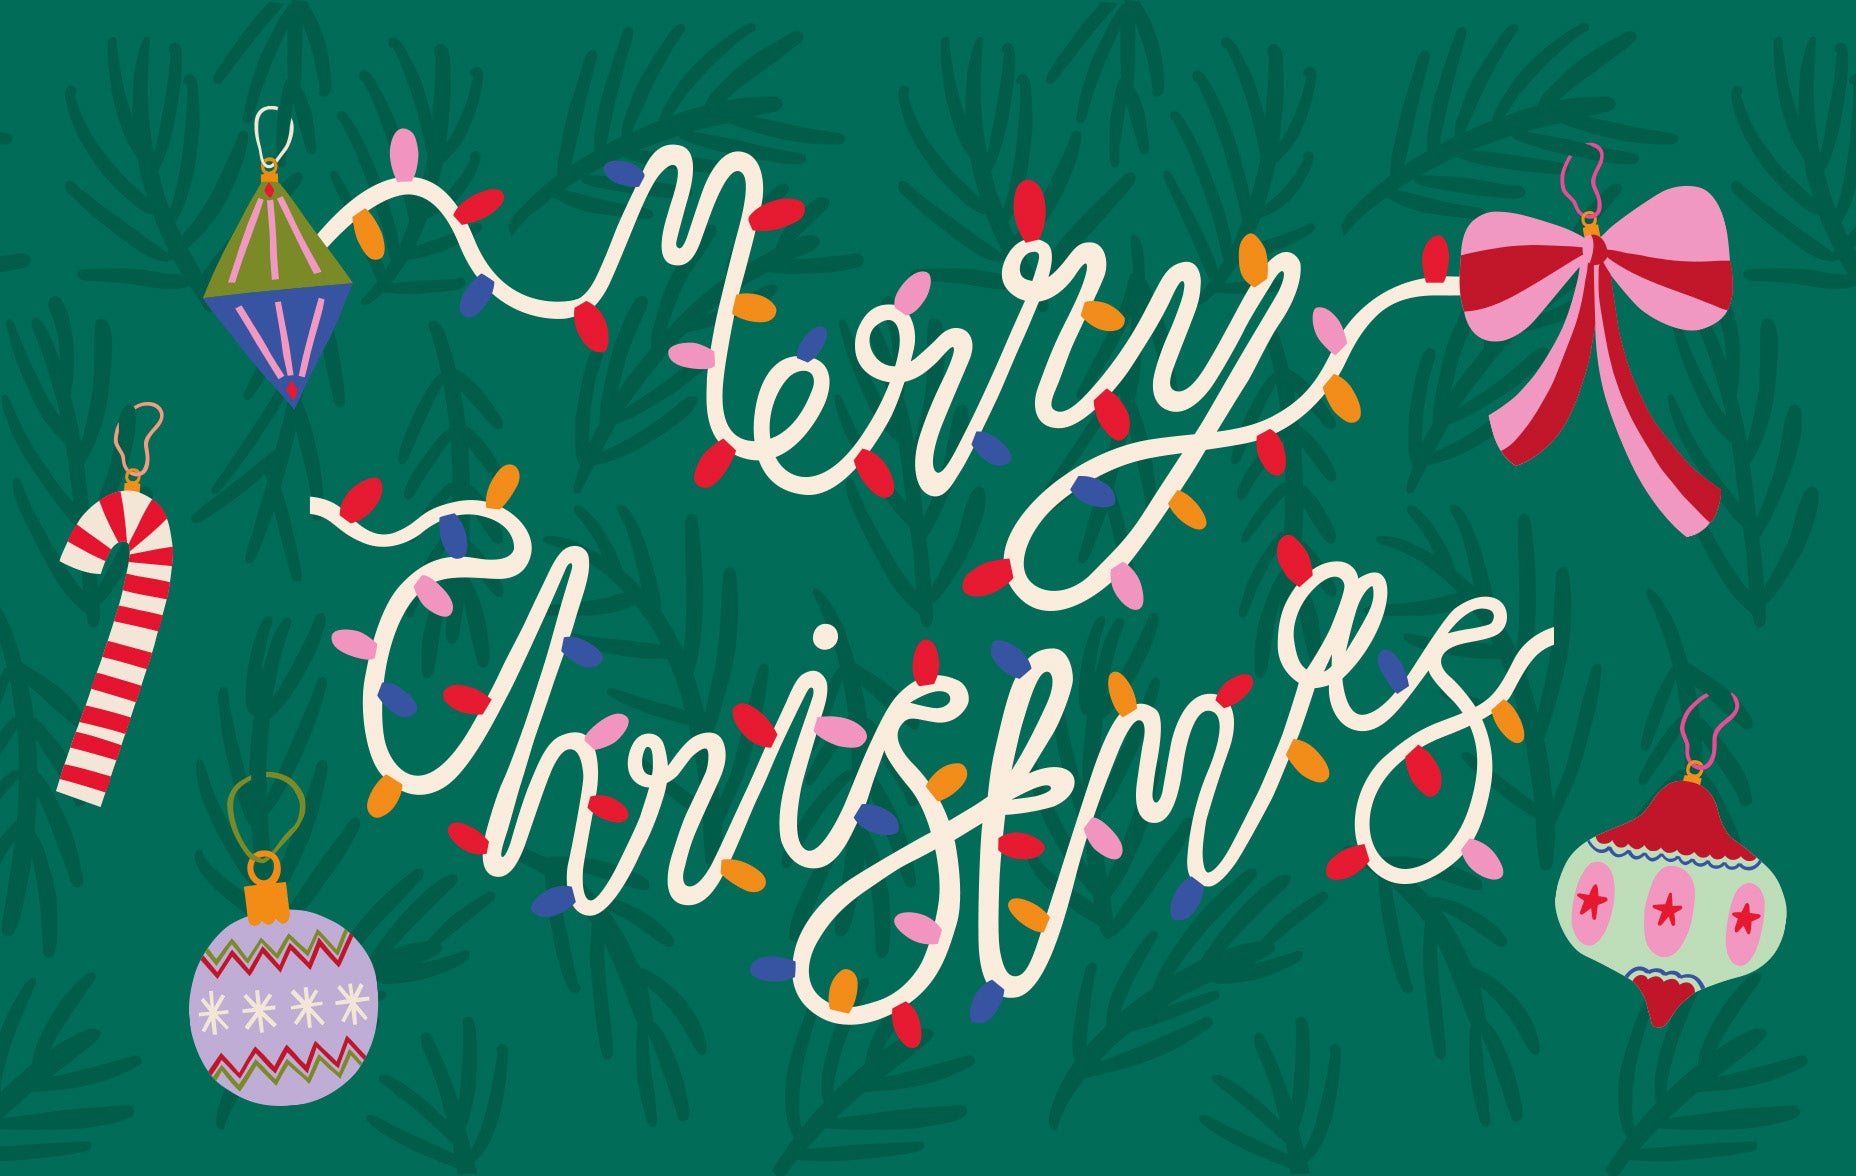 Christmas baubles with Merry Christmas message in lights wallpaper for desktop | Raspberry Blossom